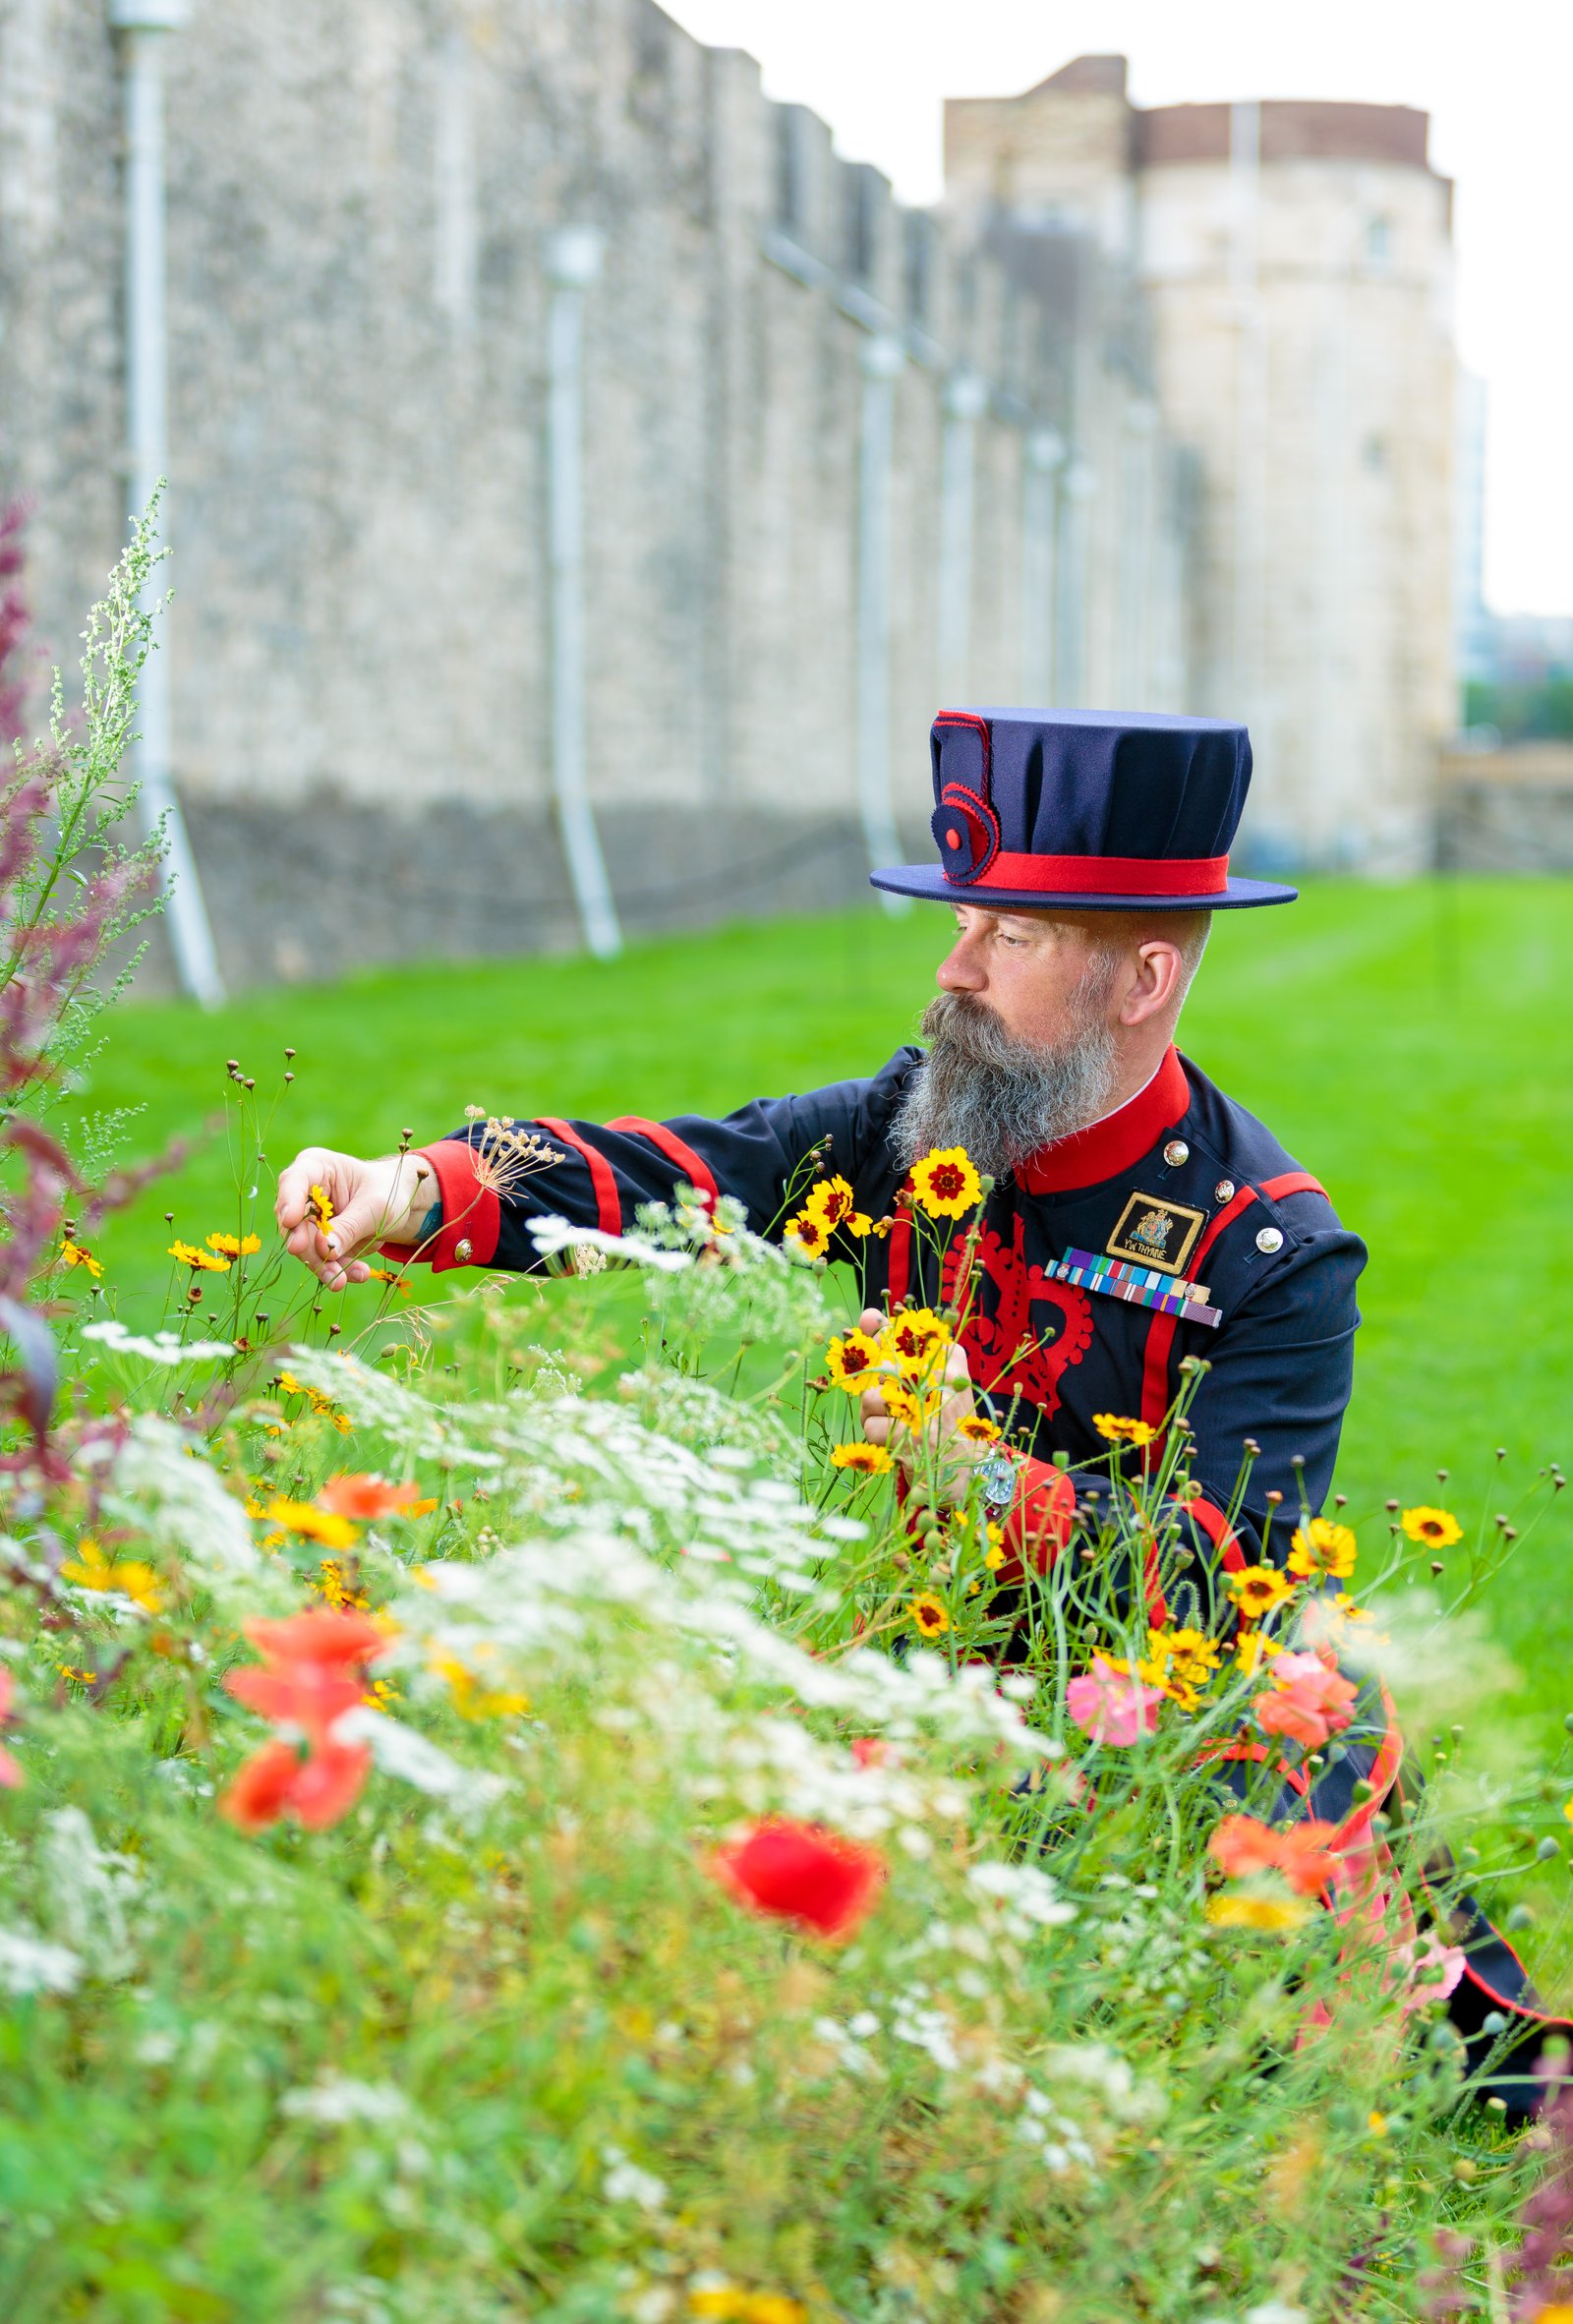 The field of flowers will celebrate the Queen's Platinum Jubilee 